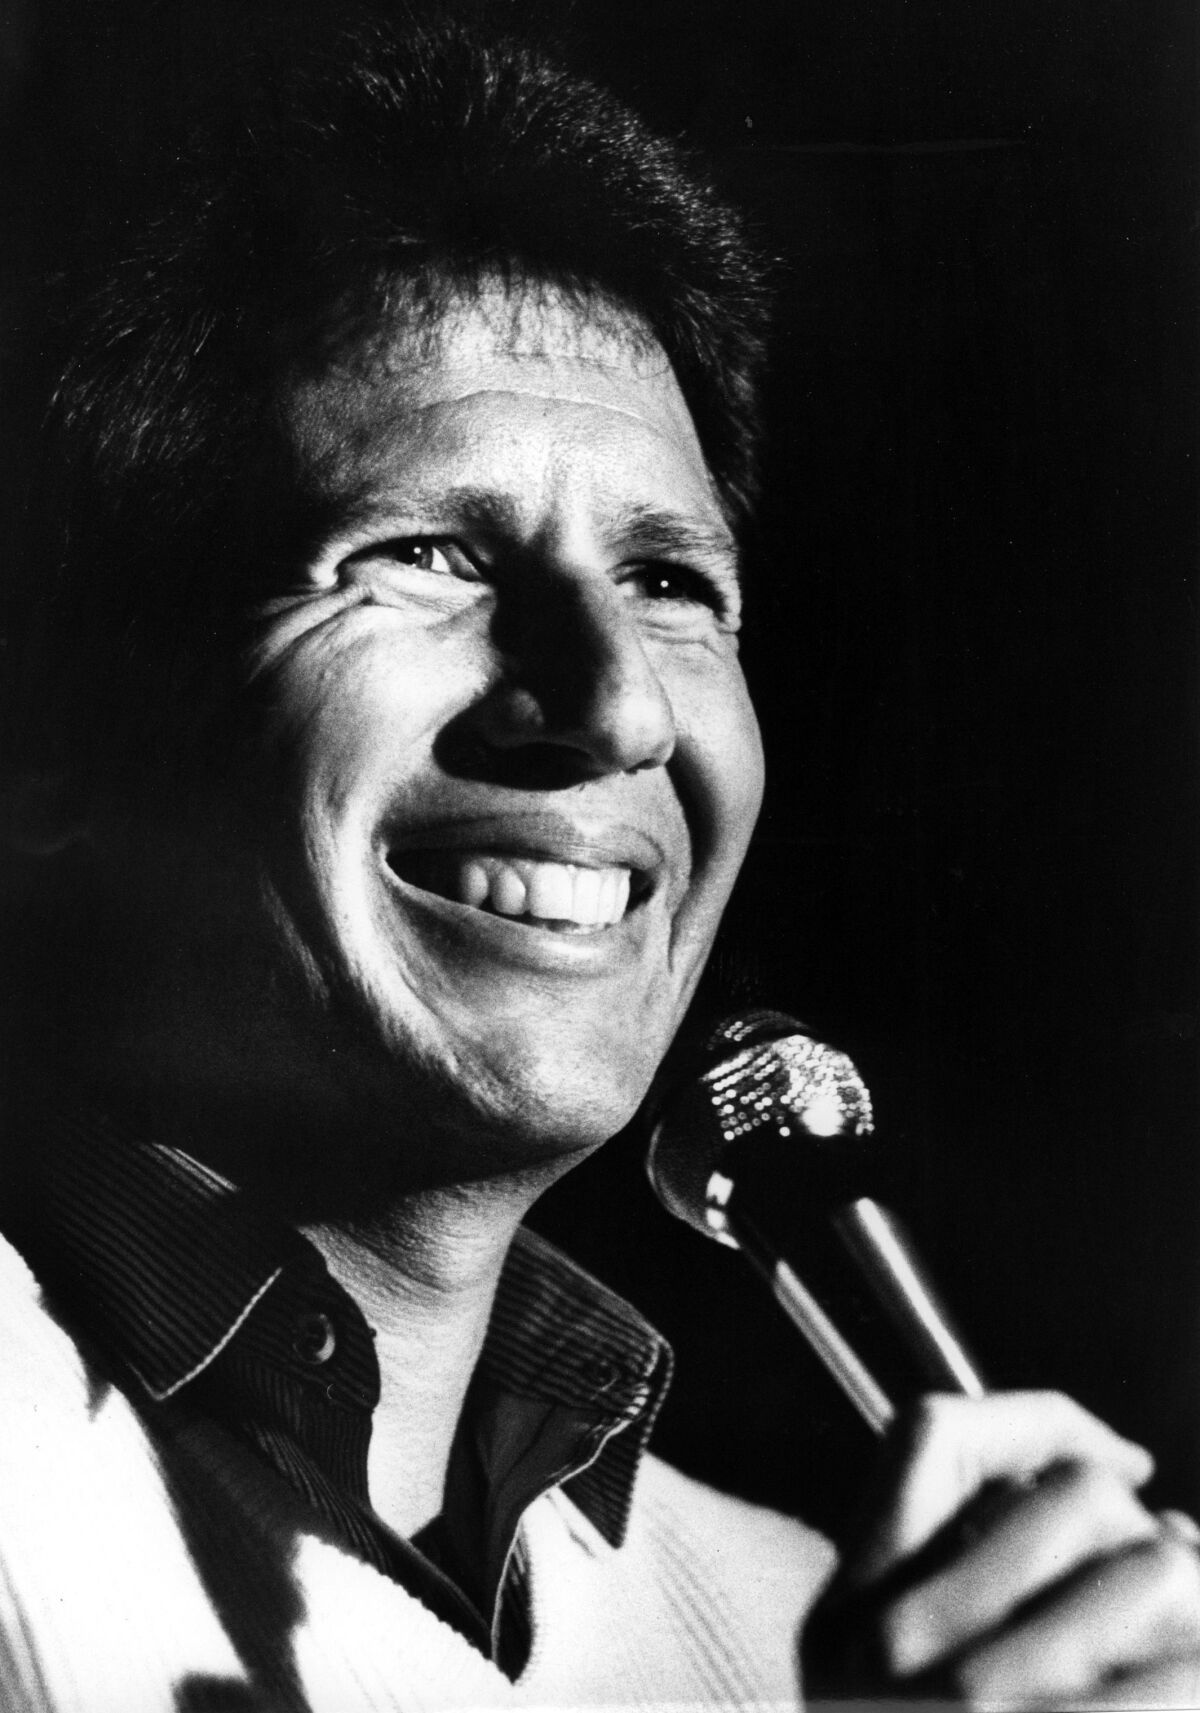 Gary Shandling performing at the Comedy Store in 1982.